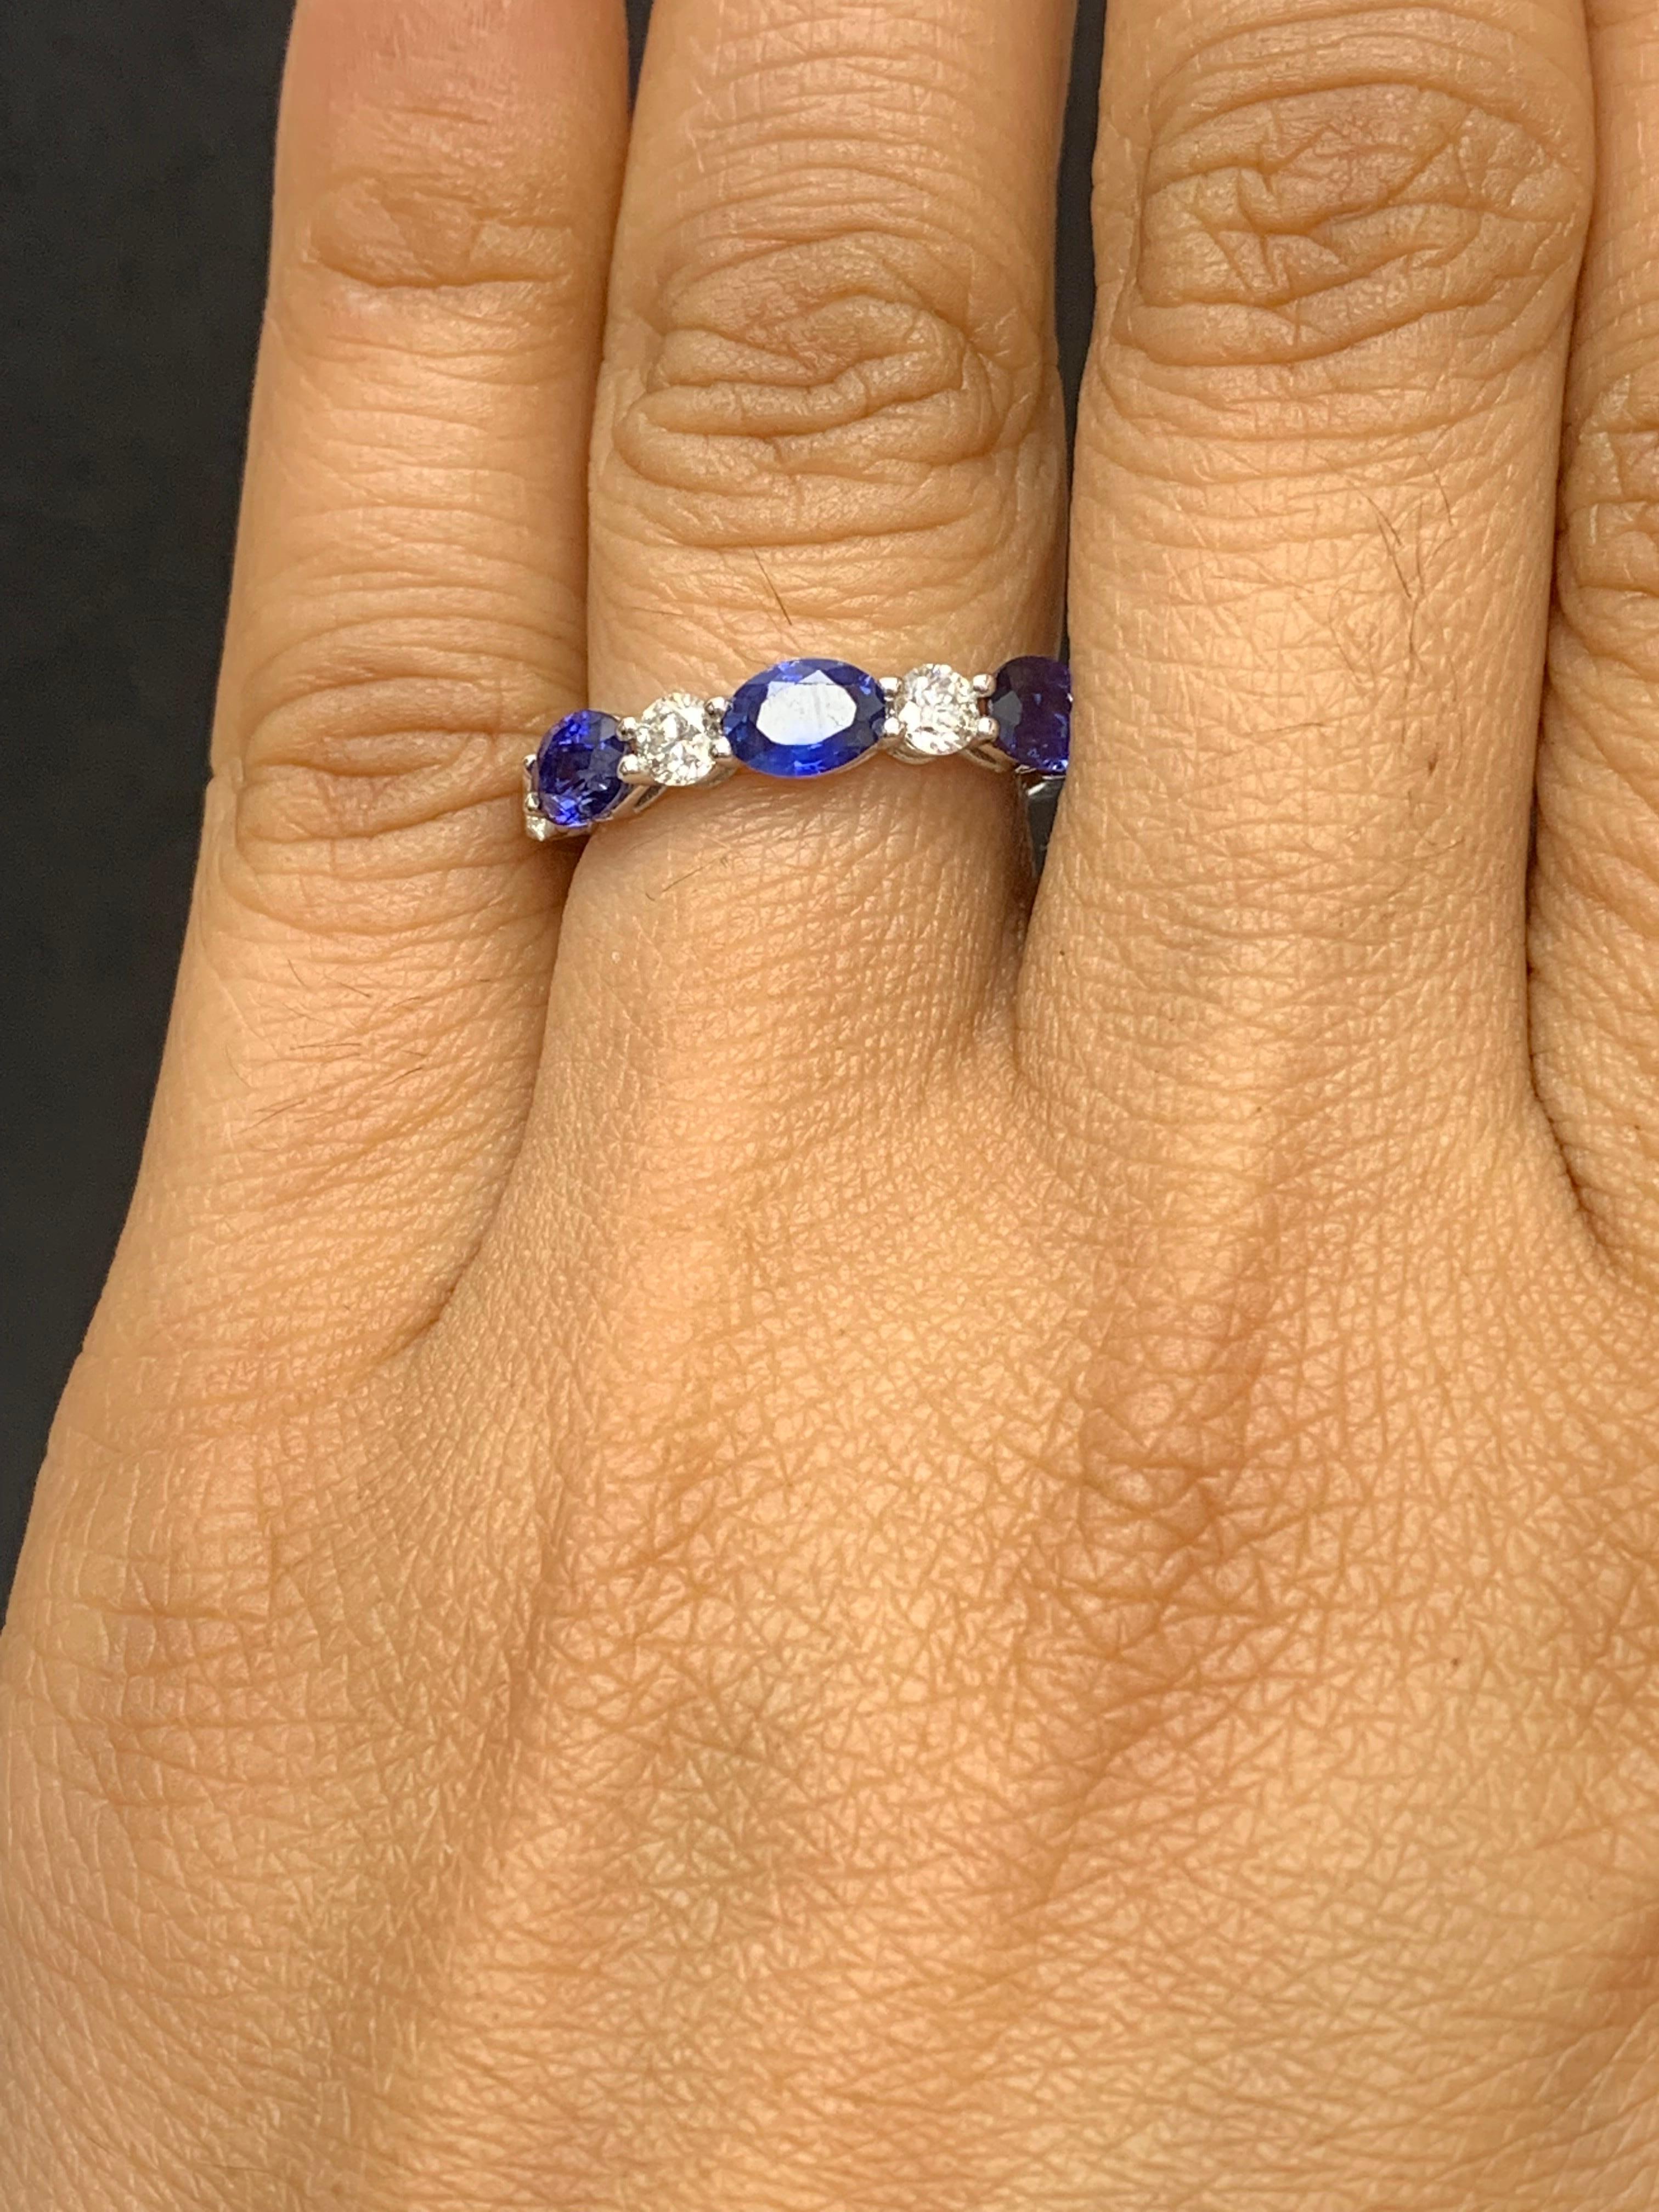 Handcrafted to perfection; showcasing color-rich oval cut sapphires that elegantly alternate round diamonds in a 14k white gold setting. 
The 3 sapphires weigh 1.62 carats total and 4 diamonds weigh 0.61 carats total.

Size 6.5 US (Sizable). One of